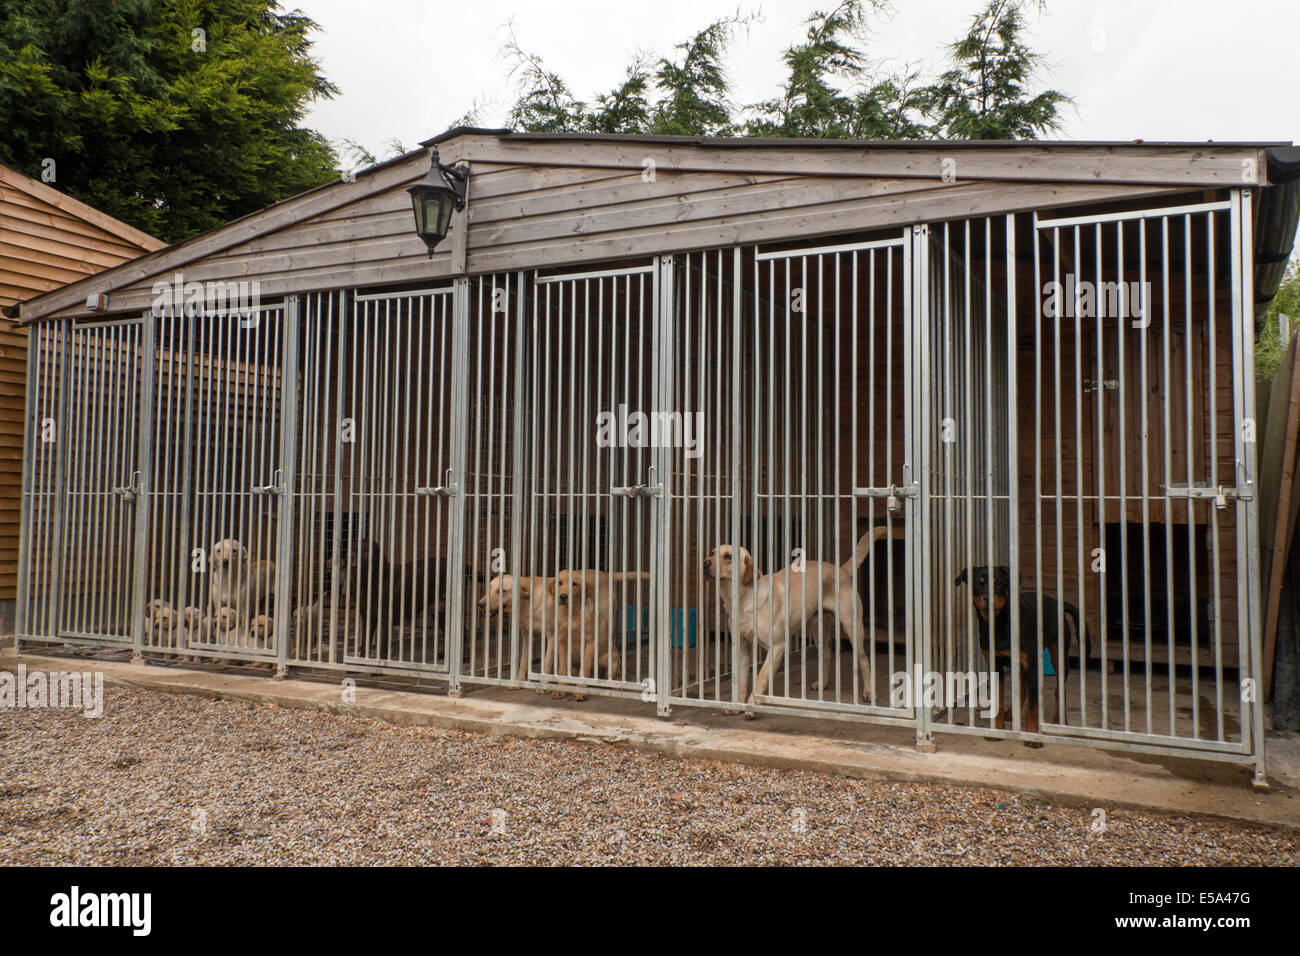 Working gun dog kennels - Yellow labrador with puppies, Rottweiler in right end cage Stock Photo